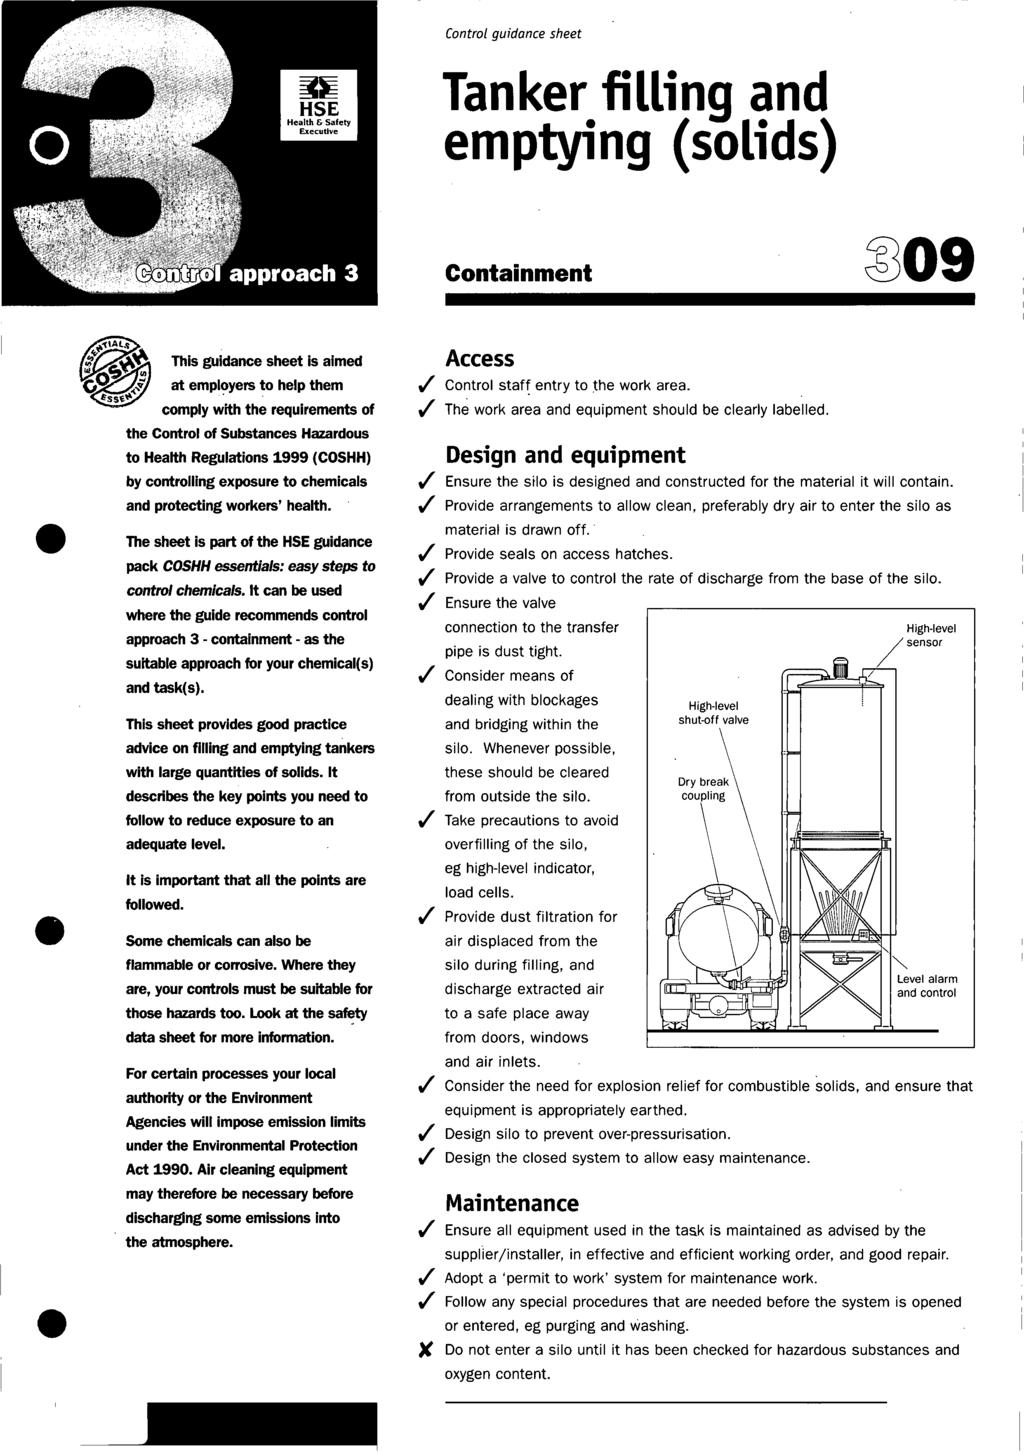 Control guidance sheet Tanker filling and emptying (solids) Containment 809 This guidance sheet is aimed at employers to help them comply with the requirements of the Control of Substances Hazardous